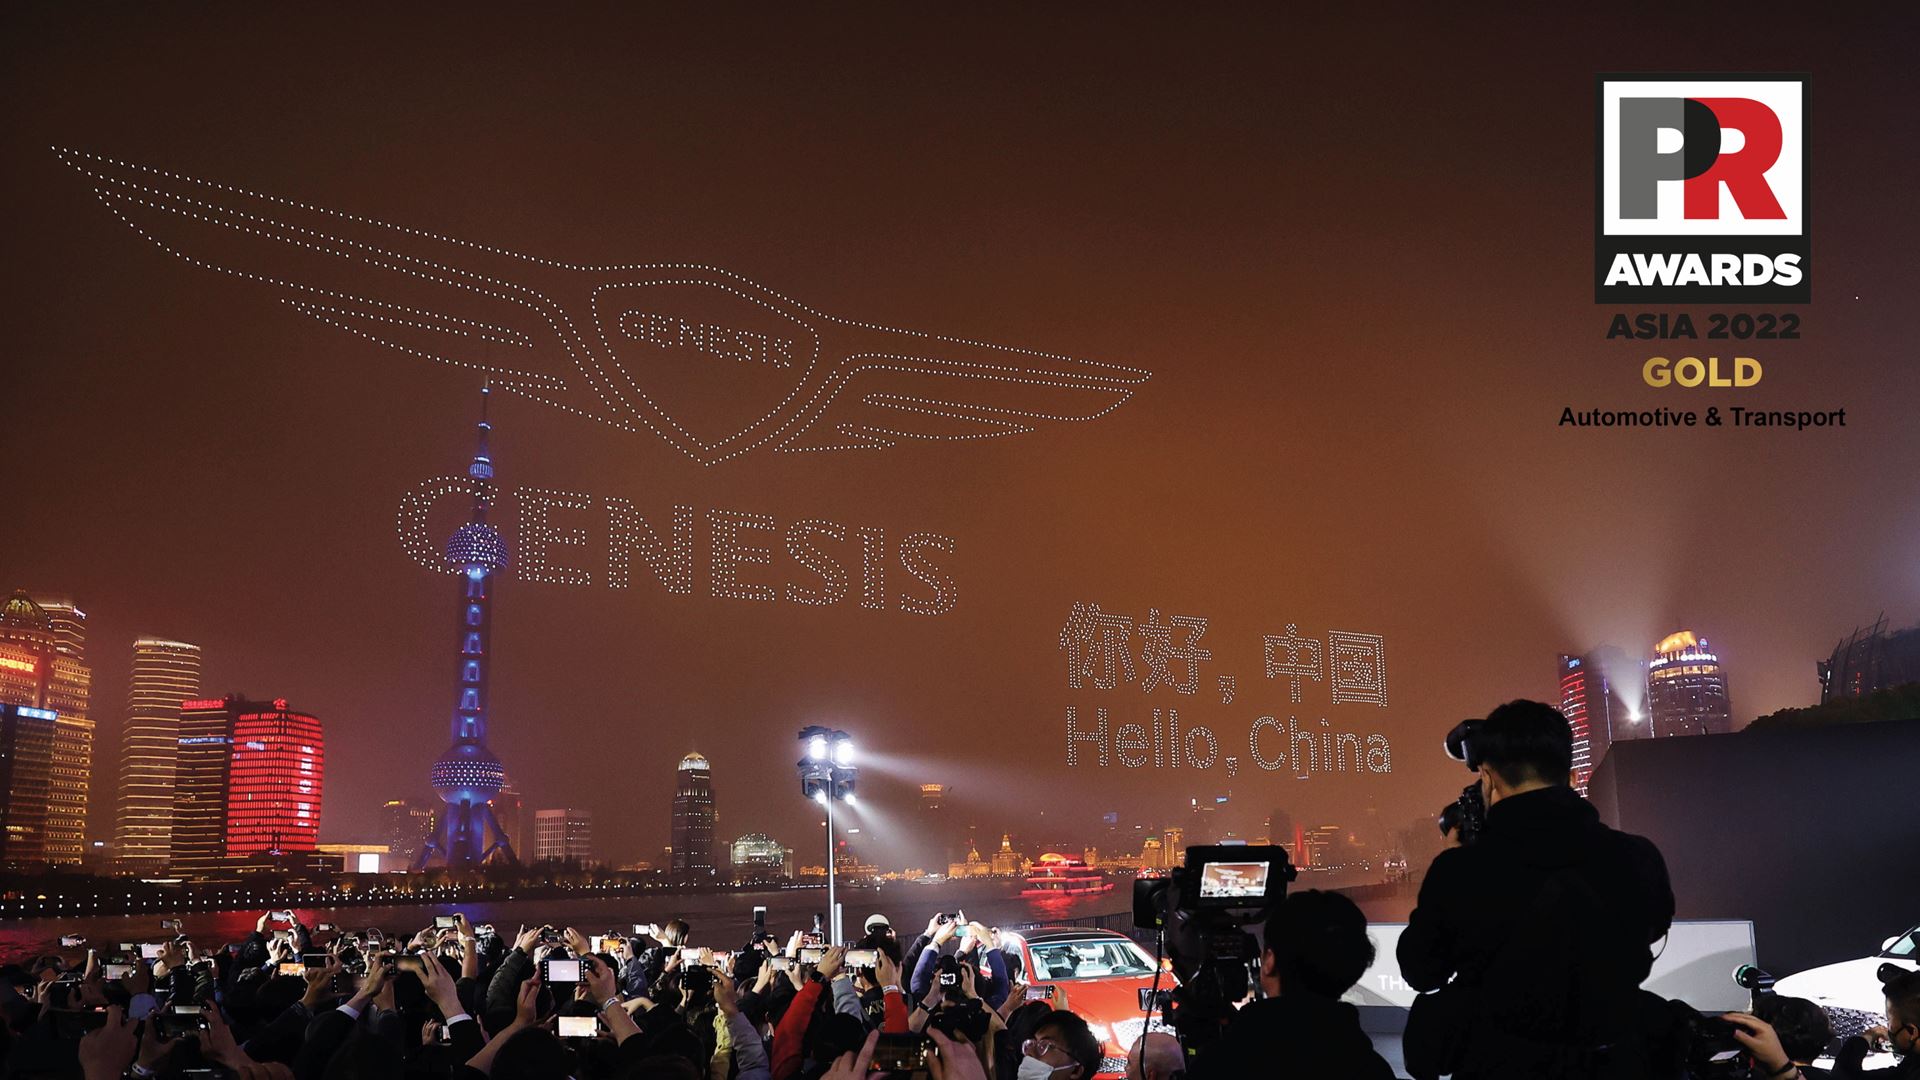 A YEAR OF PROGRESS: GENESIS’ FIRST YEAR IN CHINA